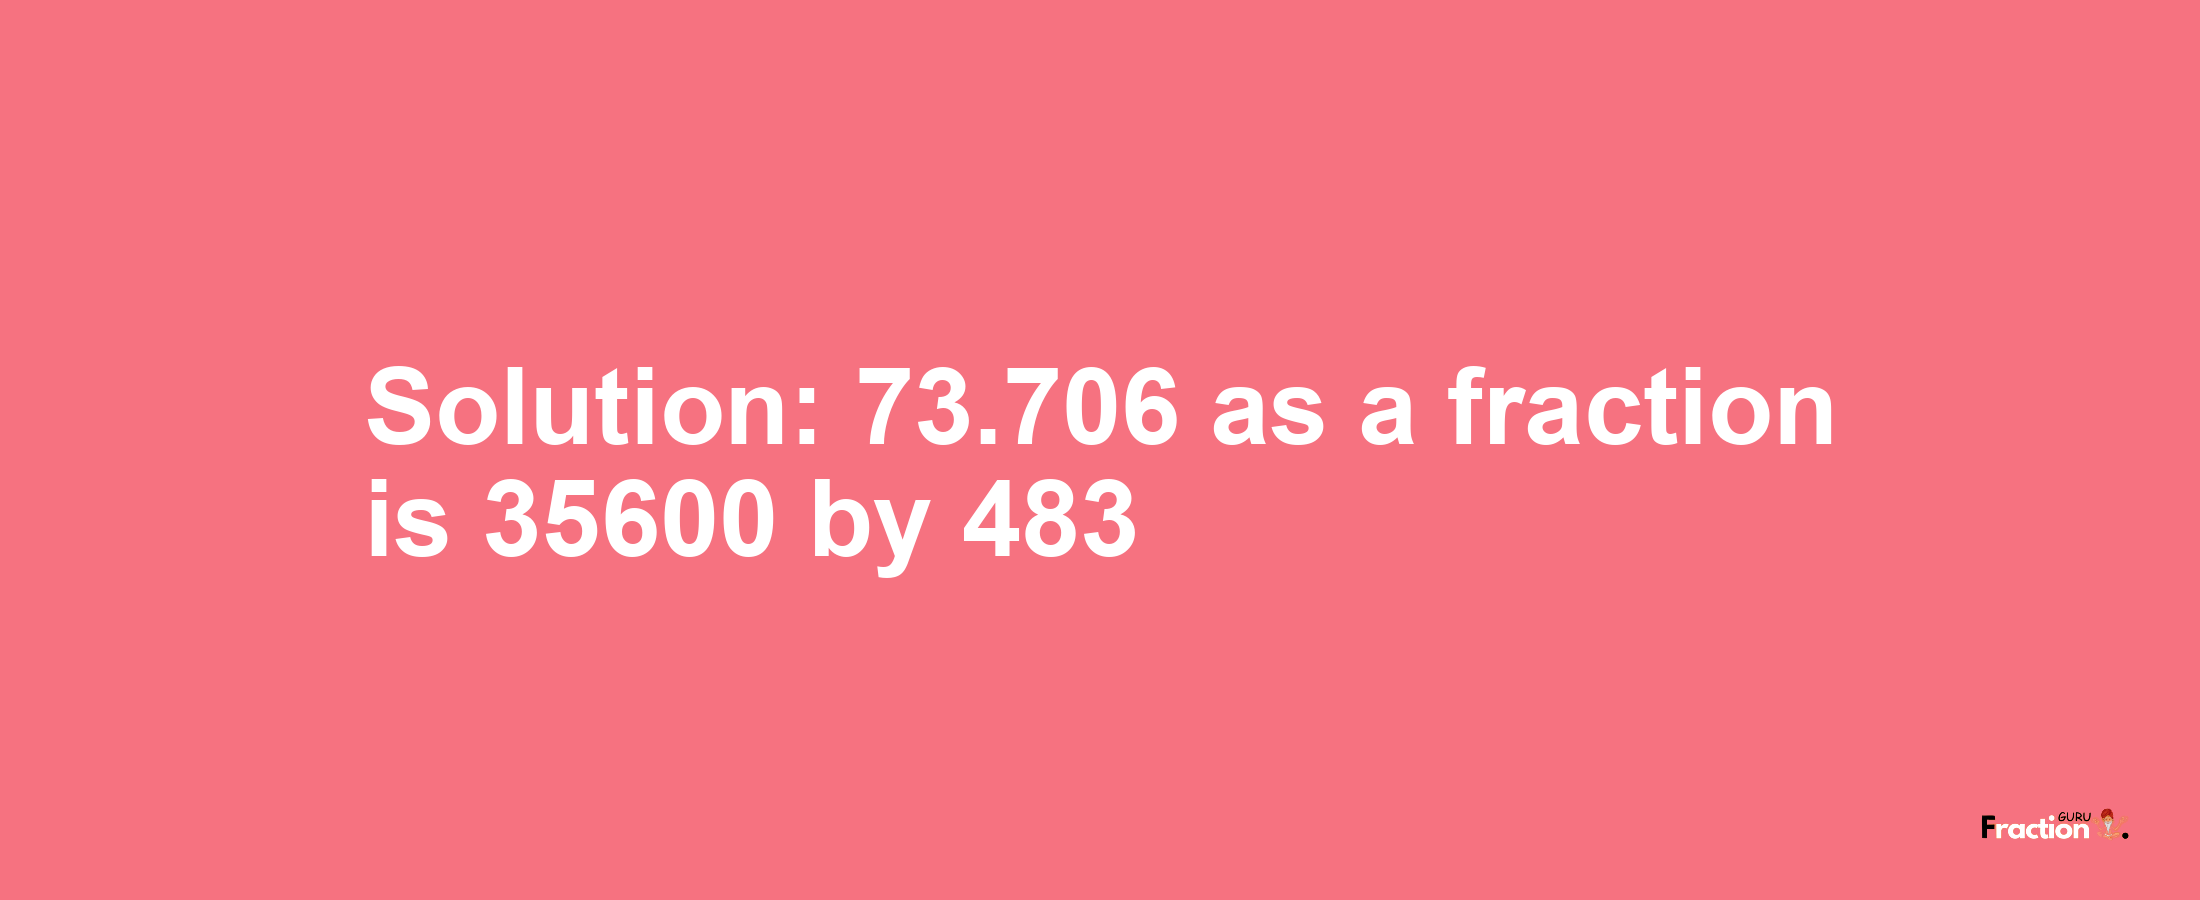 Solution:73.706 as a fraction is 35600/483